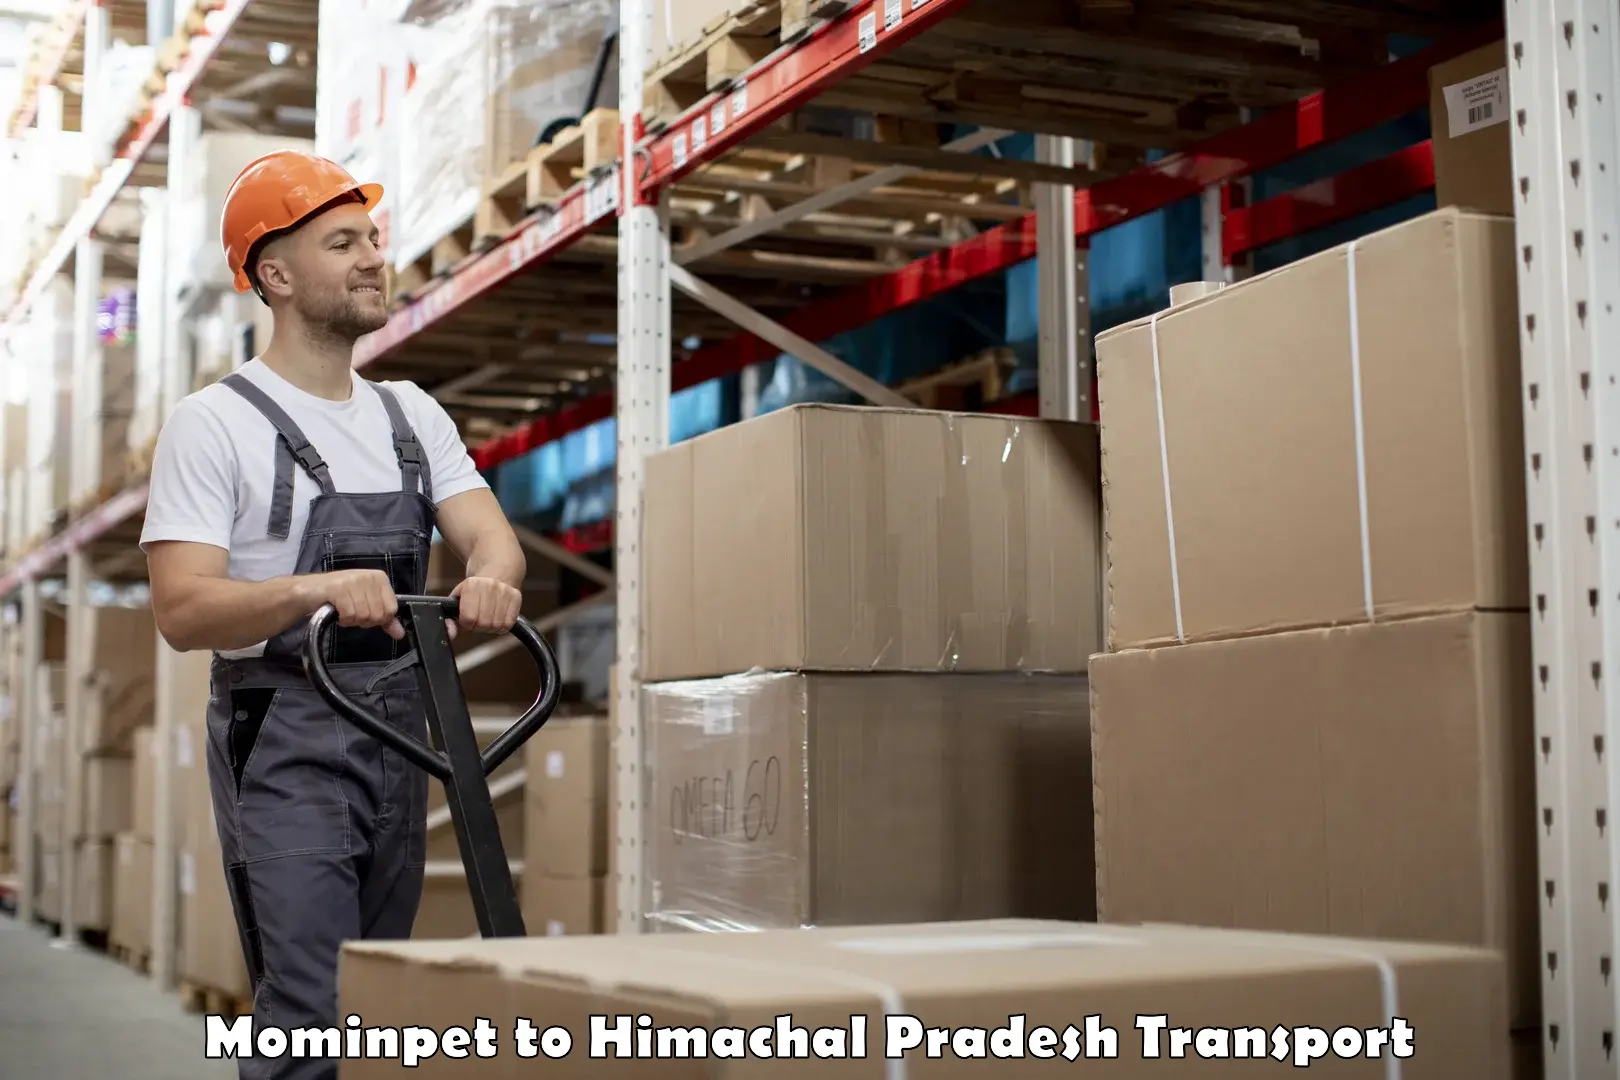 Air freight transport services Mominpet to Rampur Bushahr